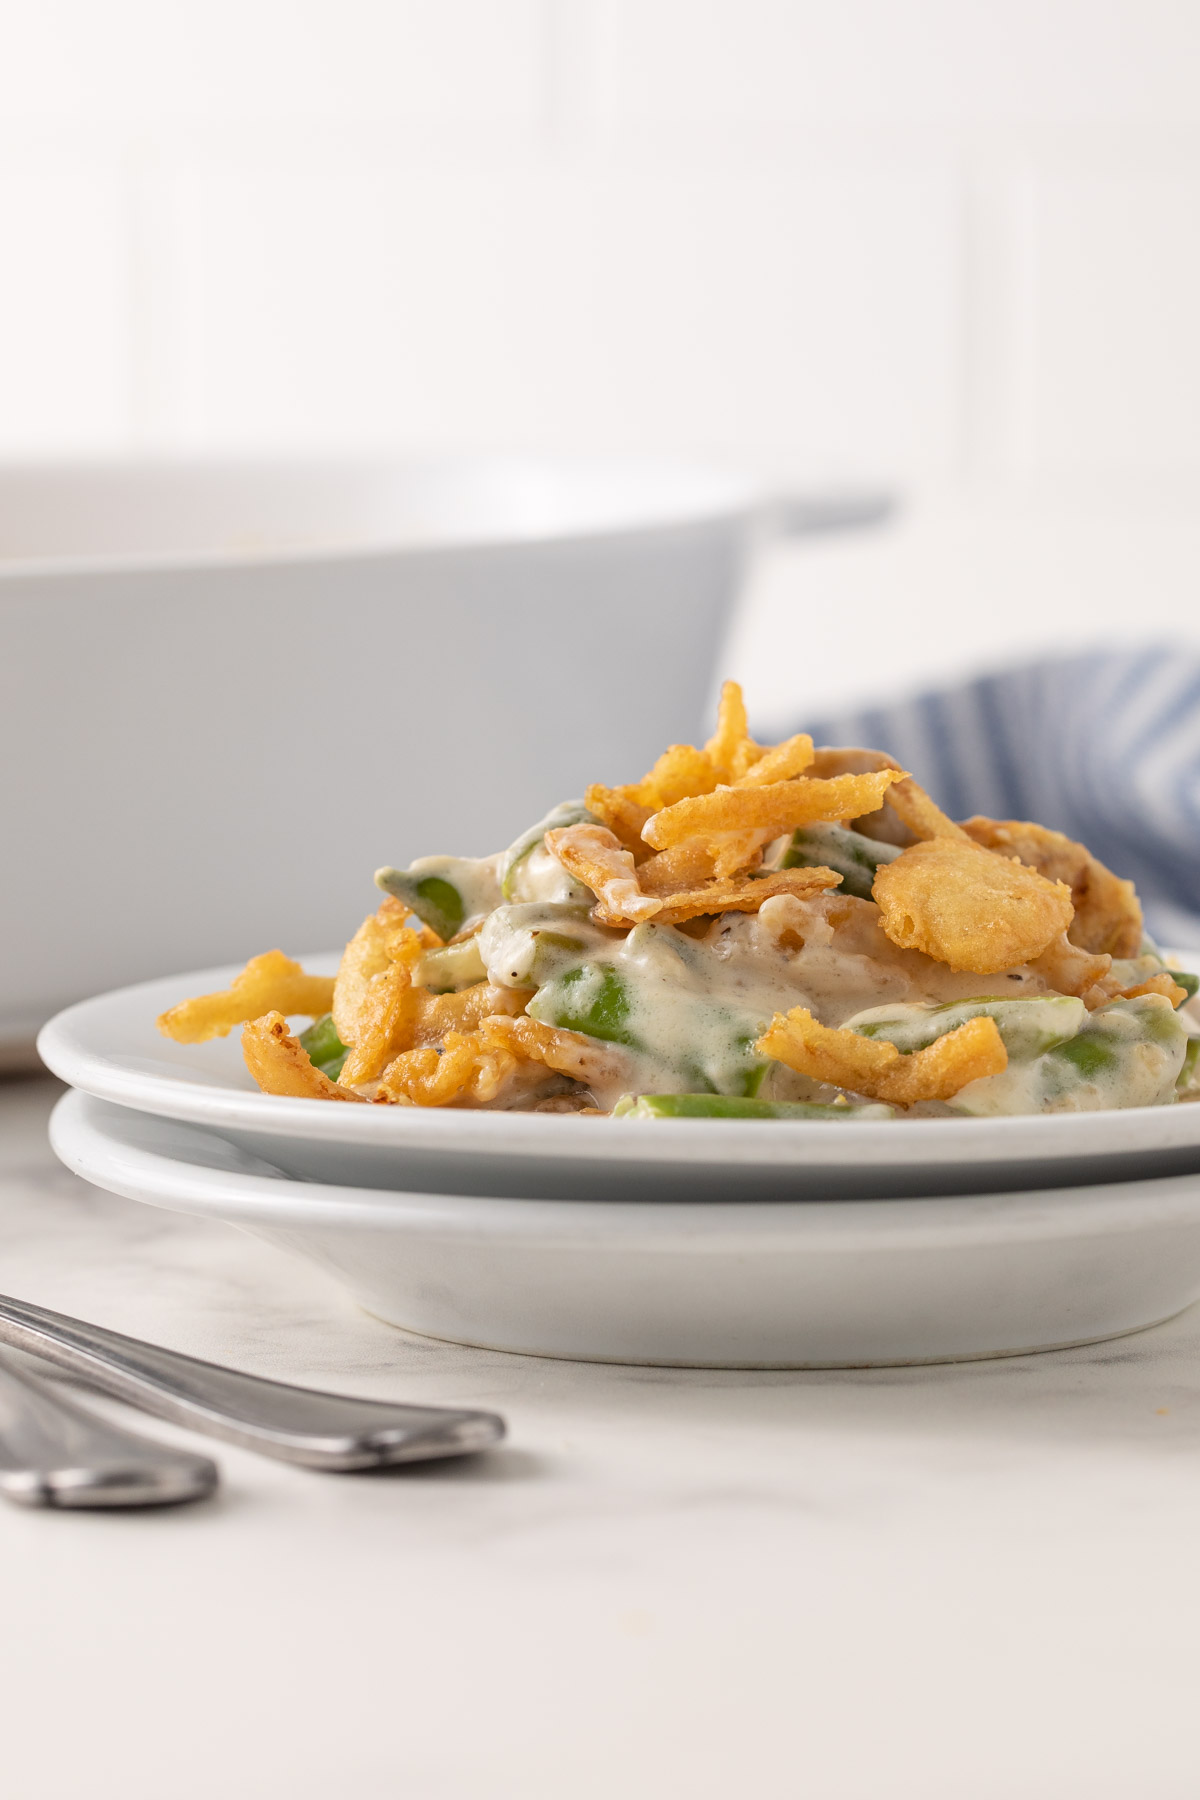 Front view of green bean casserole on a small round white plate.